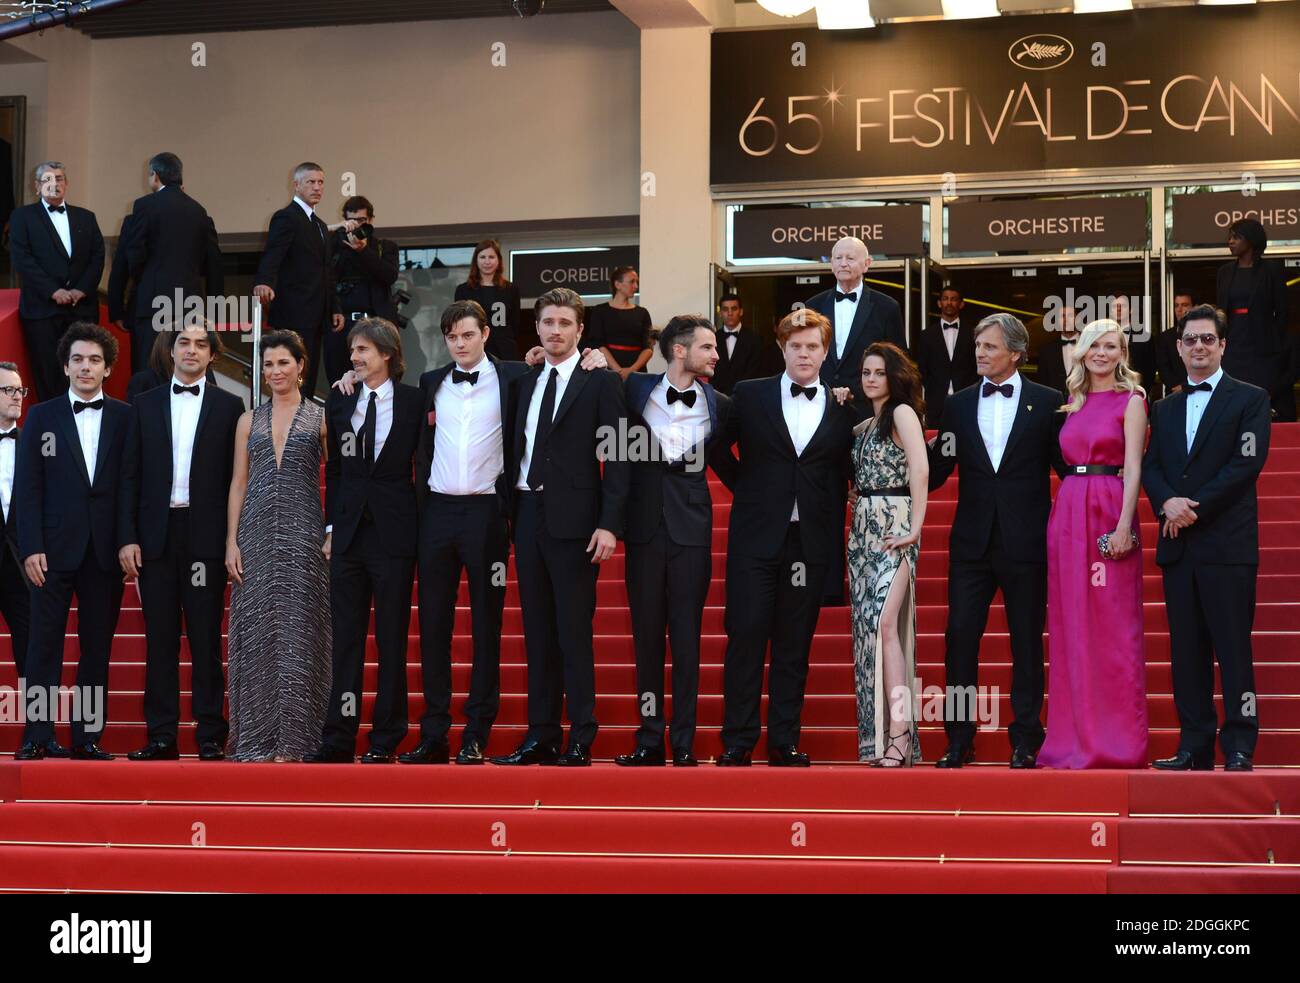 Actor Garret Hedlund, director Walter Salles, actors Tom Sturridge, Kristen Stewart, Danny Morgan, Kirsten Dunst, producer Roman Coppola, actor Sam Riley and Viggo Mortensen arriving at the Gala Screening for On the Road at the Palais de Festival. Part of the 65th Cannes Film Festival. Stock Photo